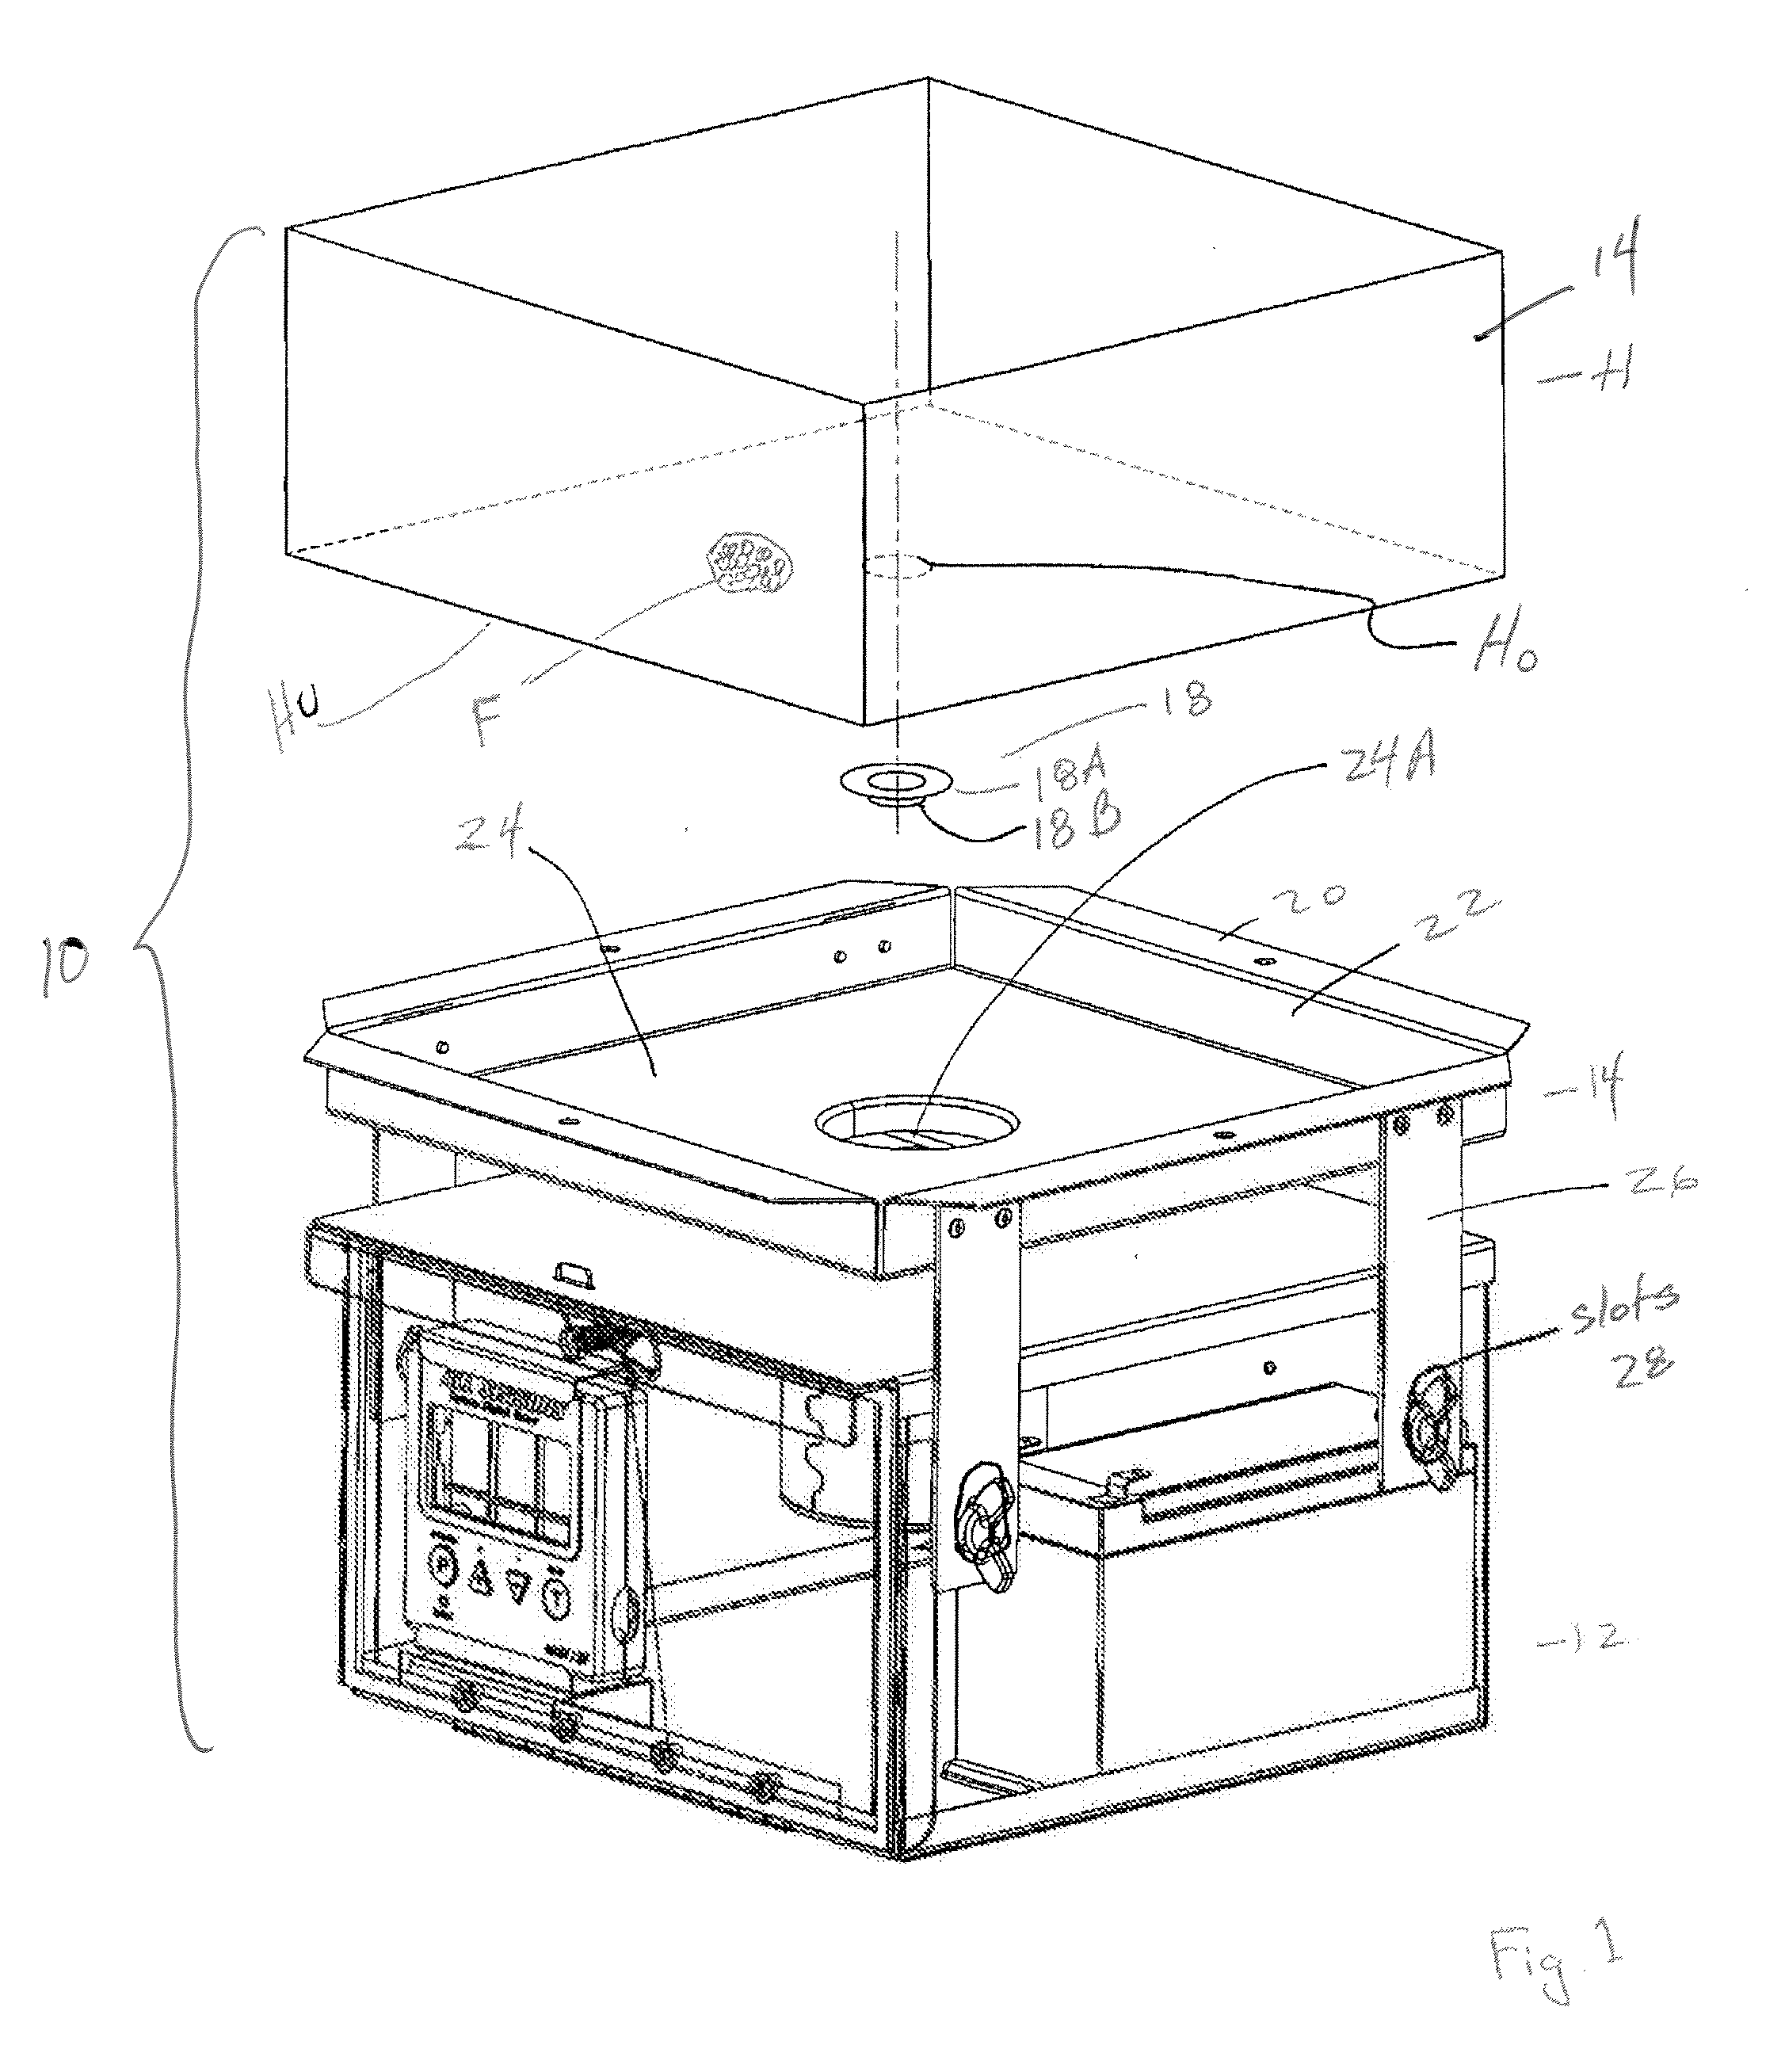 Integral control box, spinner and funnel unit with adjustable legs